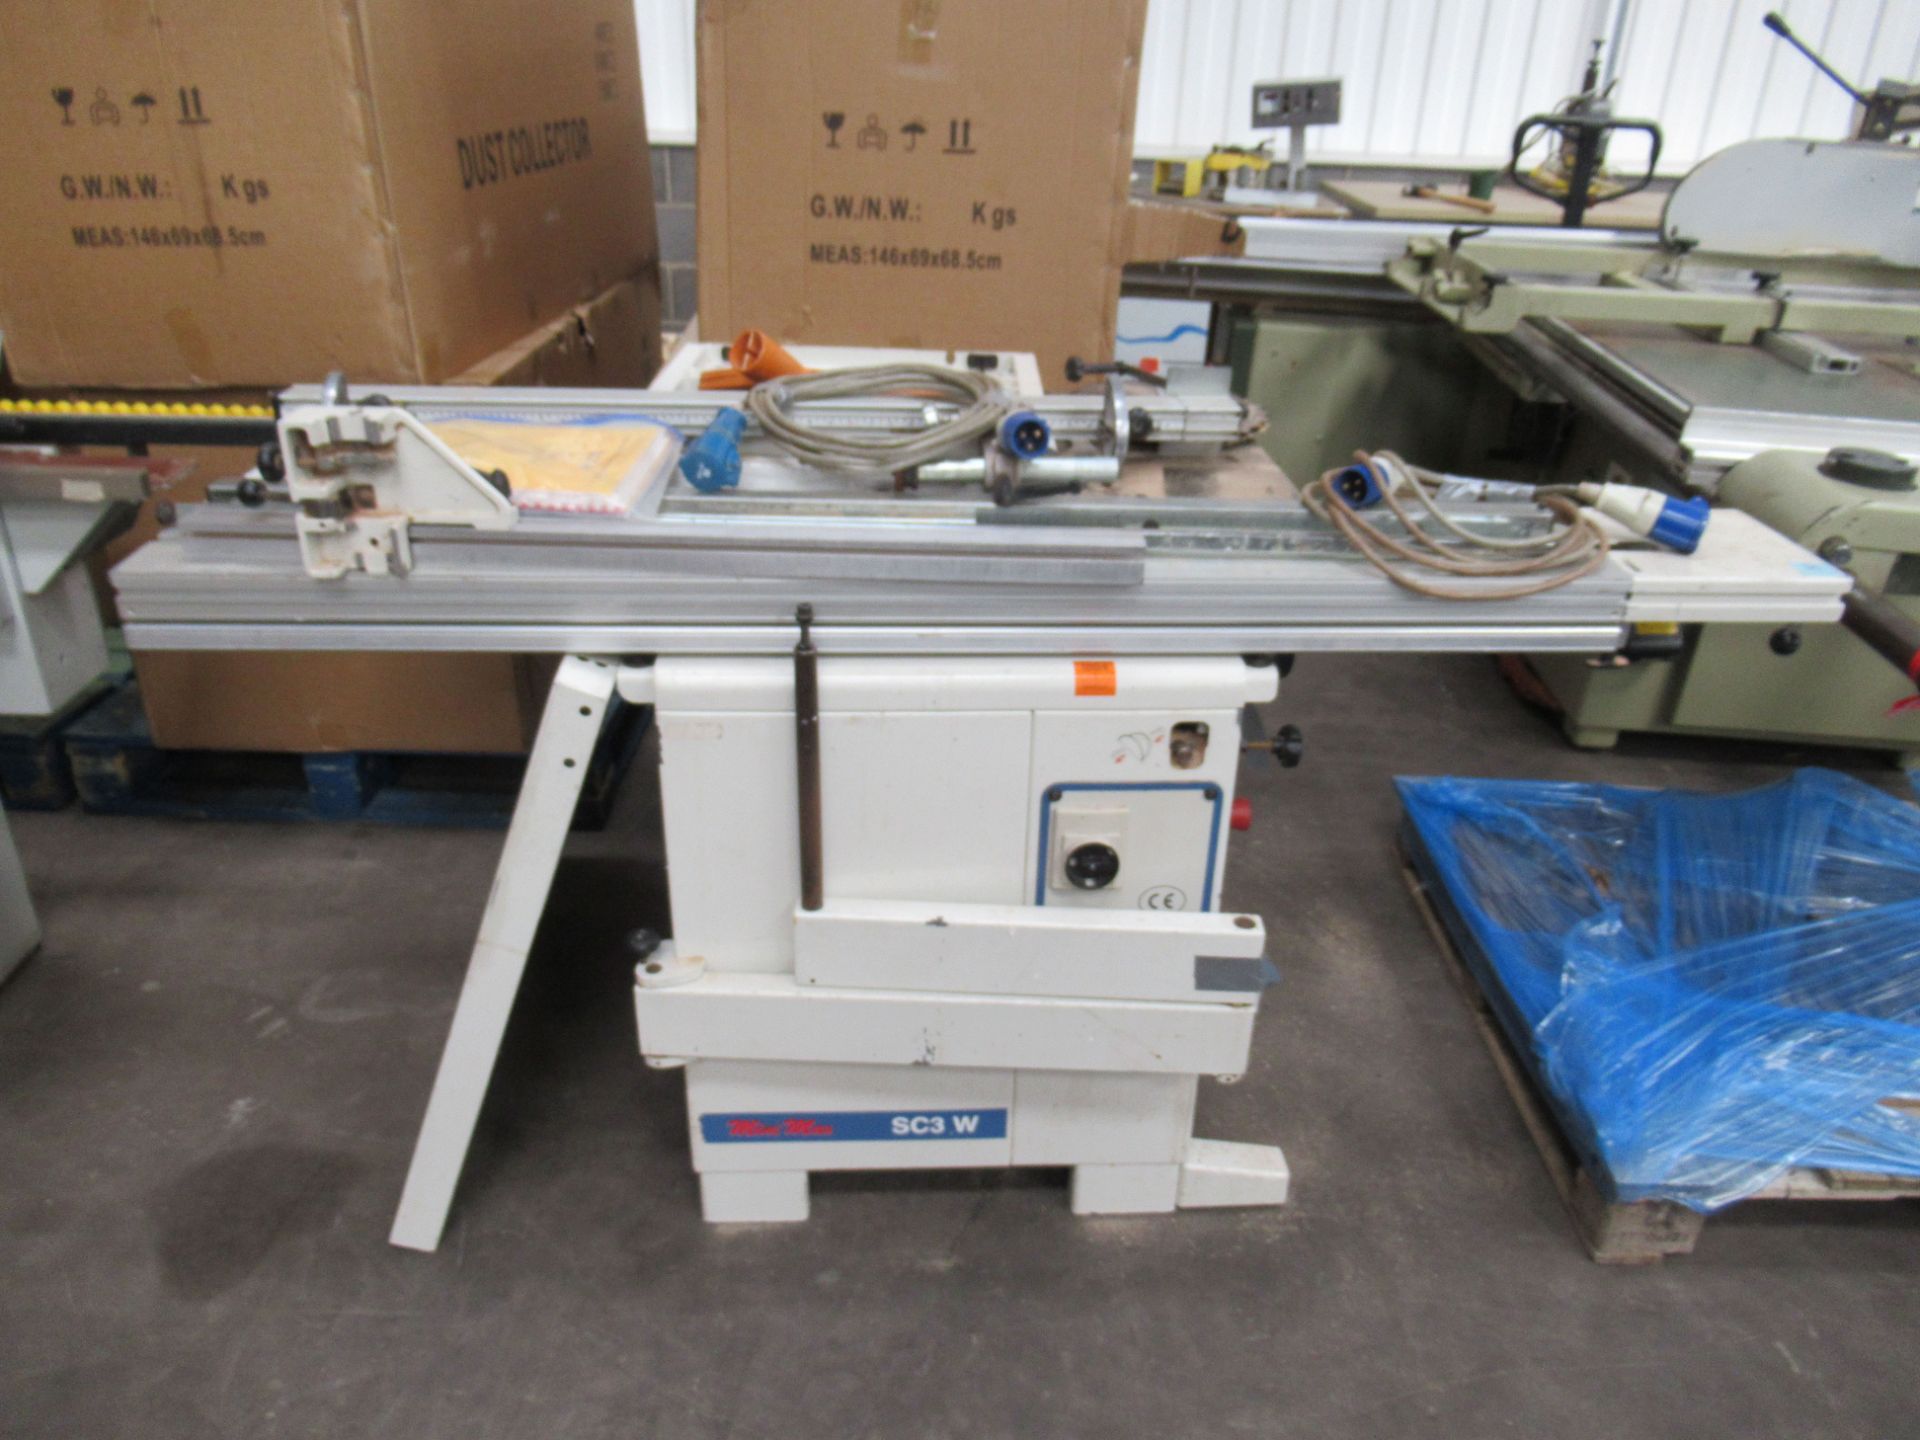 SCM MiniMax SC3W Table Saw with Attachments. 240V. Single phase.